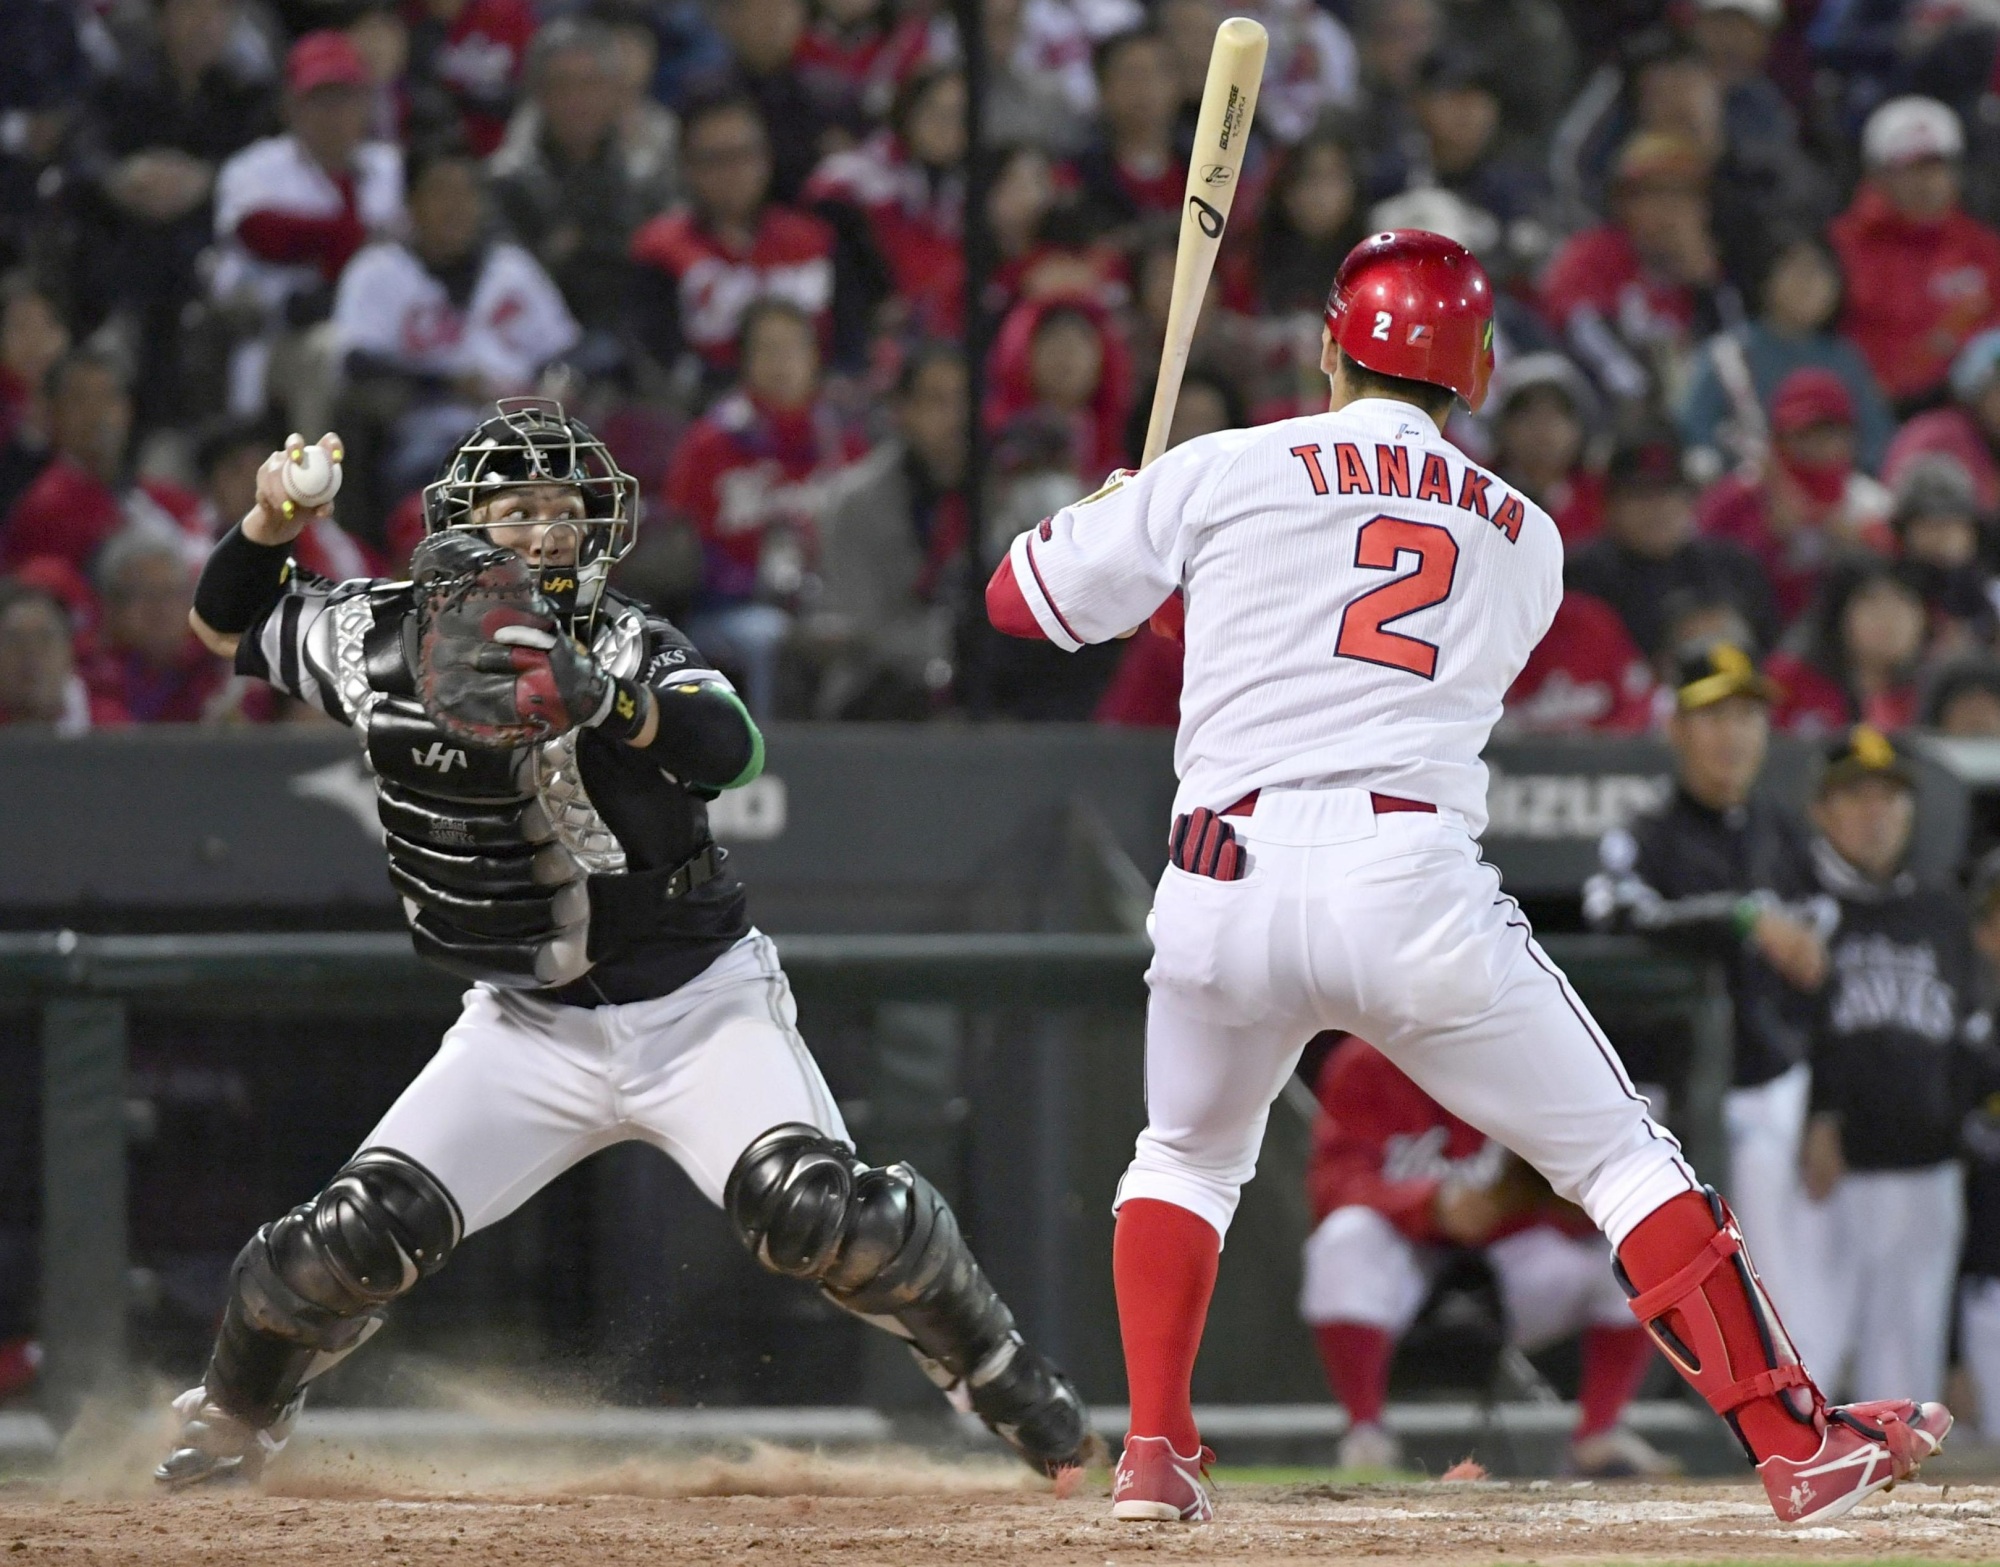 Hawks catcher Takuya Kai throws out Carp base runner Takashi Uemoto at second base to end the ninth inning as Kosuke Tanaka looks on from the batter's box in Game 1 of the Japan Series on Saturday at Mazda Stadium. | KYODO